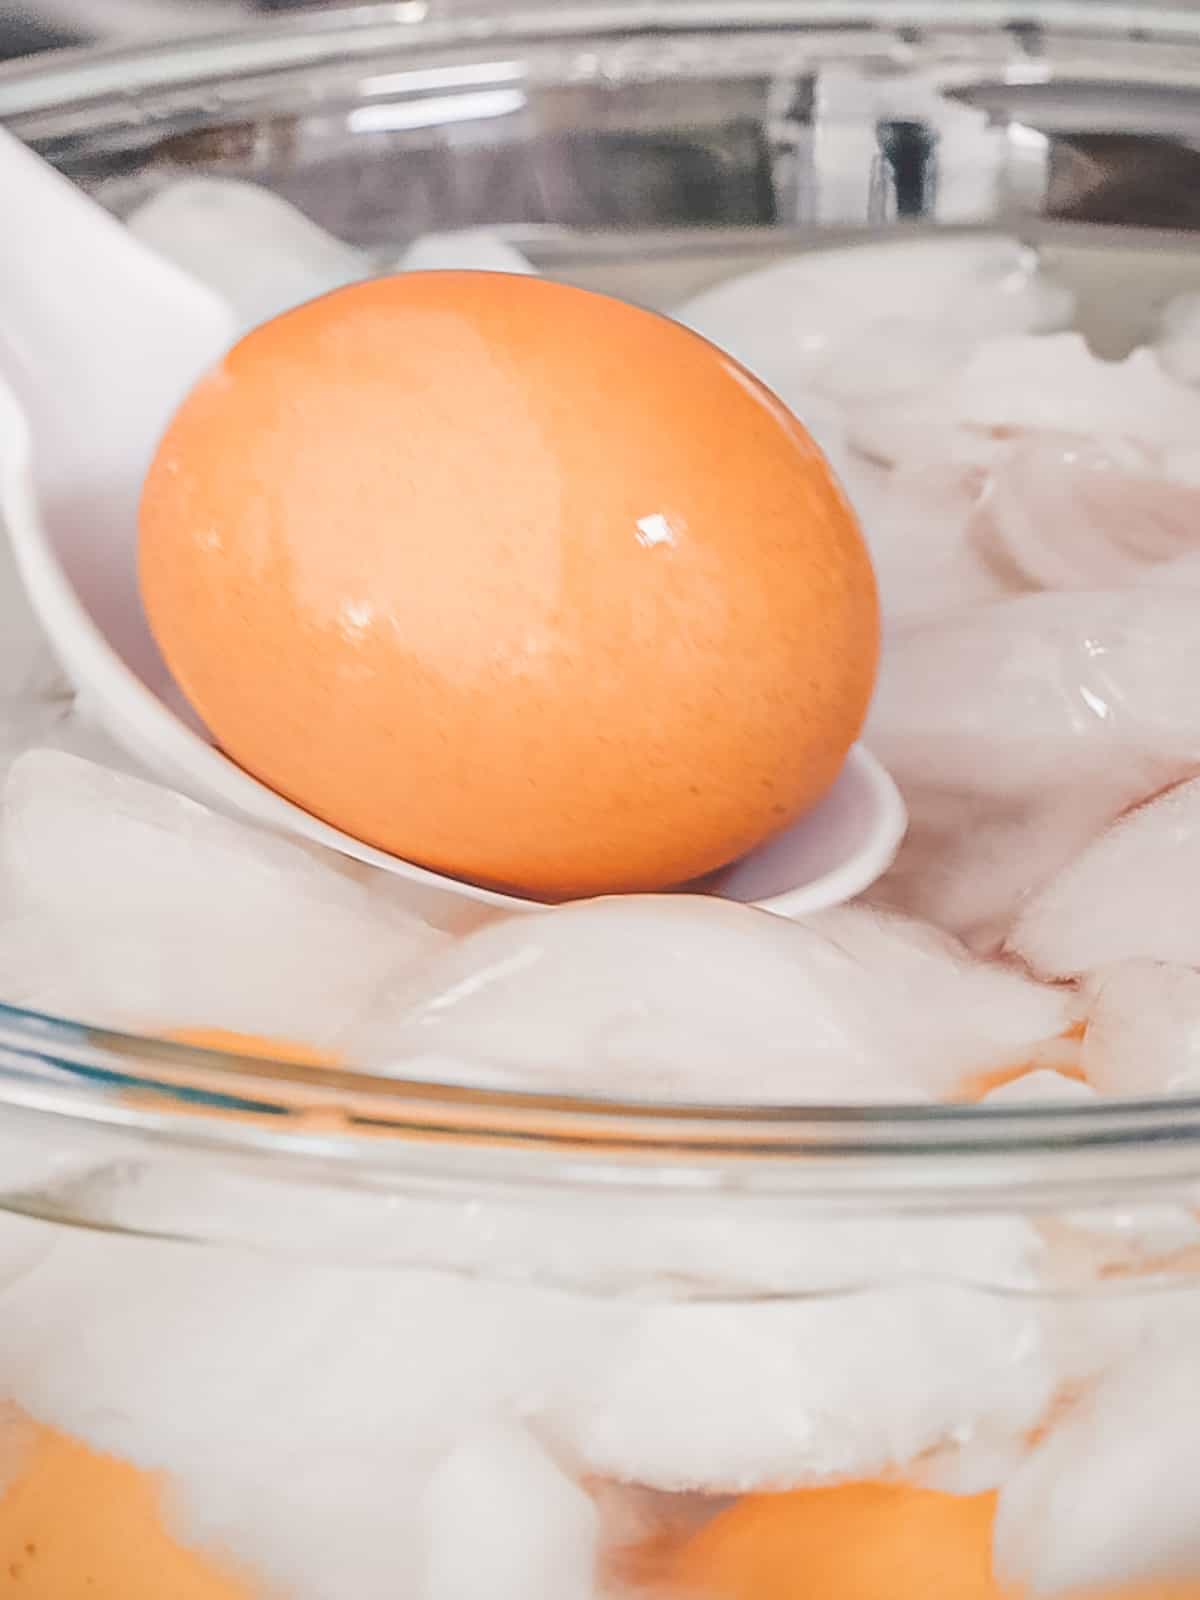 Soft boiled egg placed in an ice bath to stop cooking.